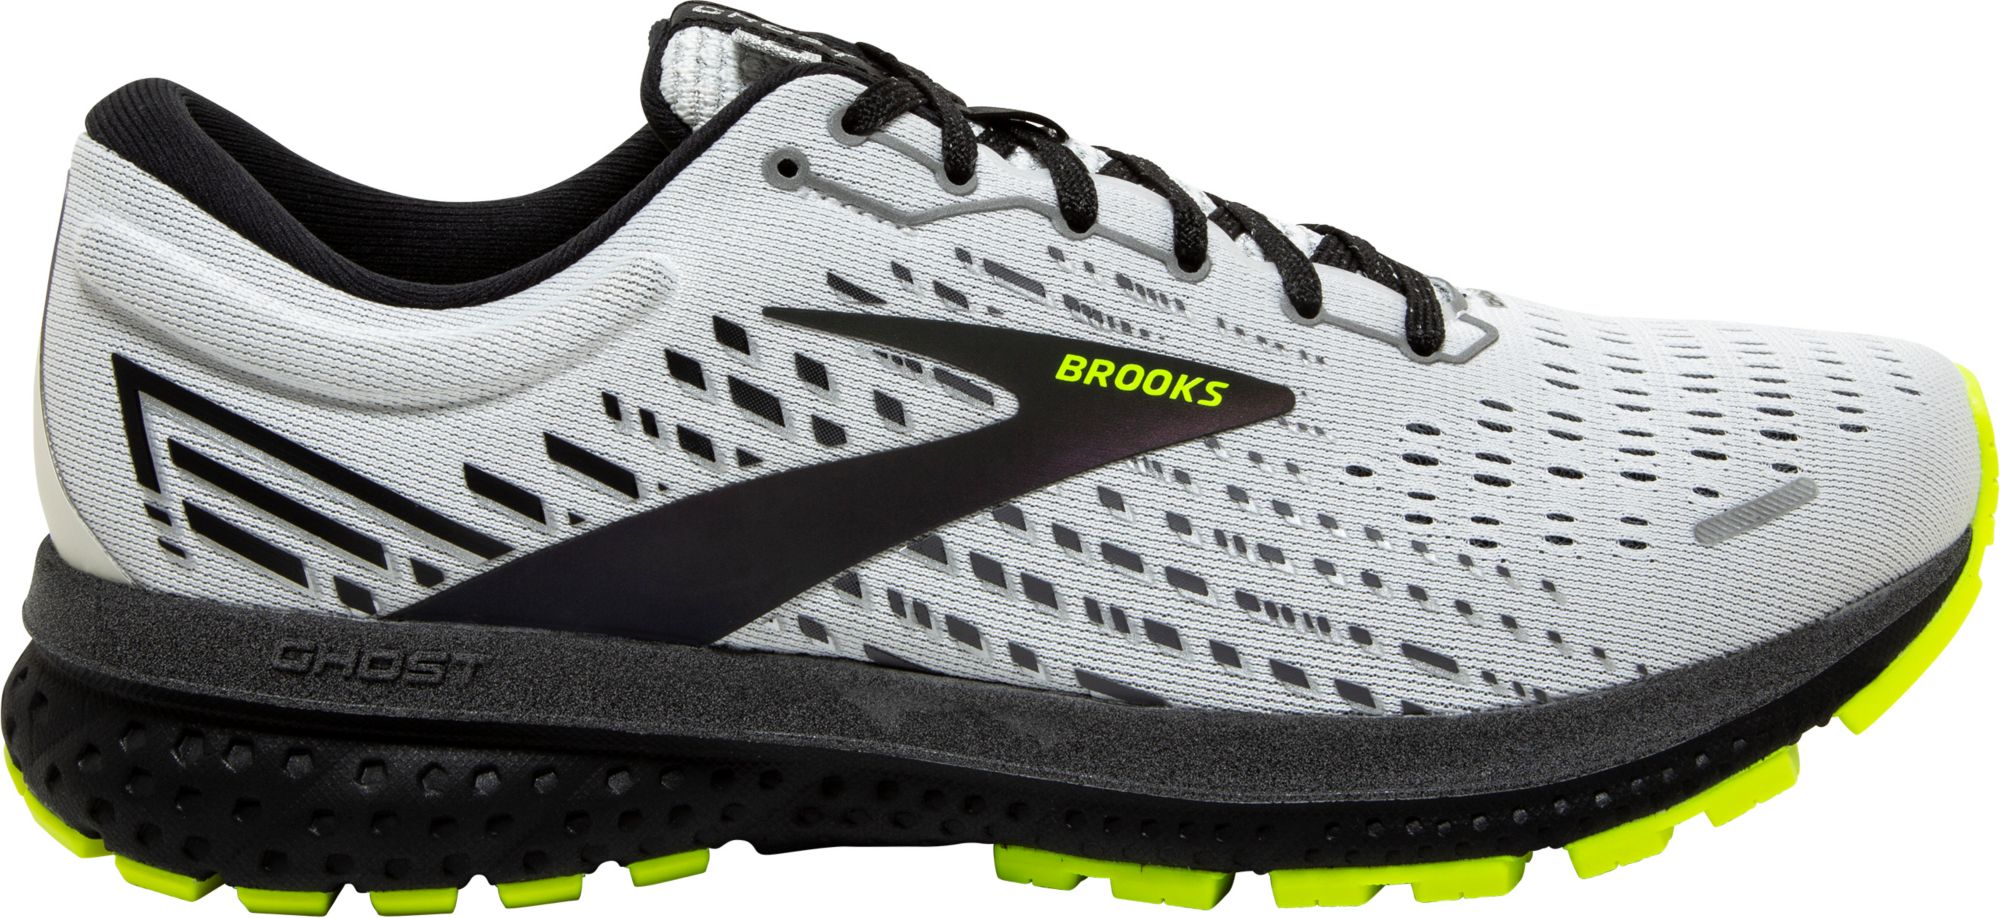 brooks ghost tennis shoes